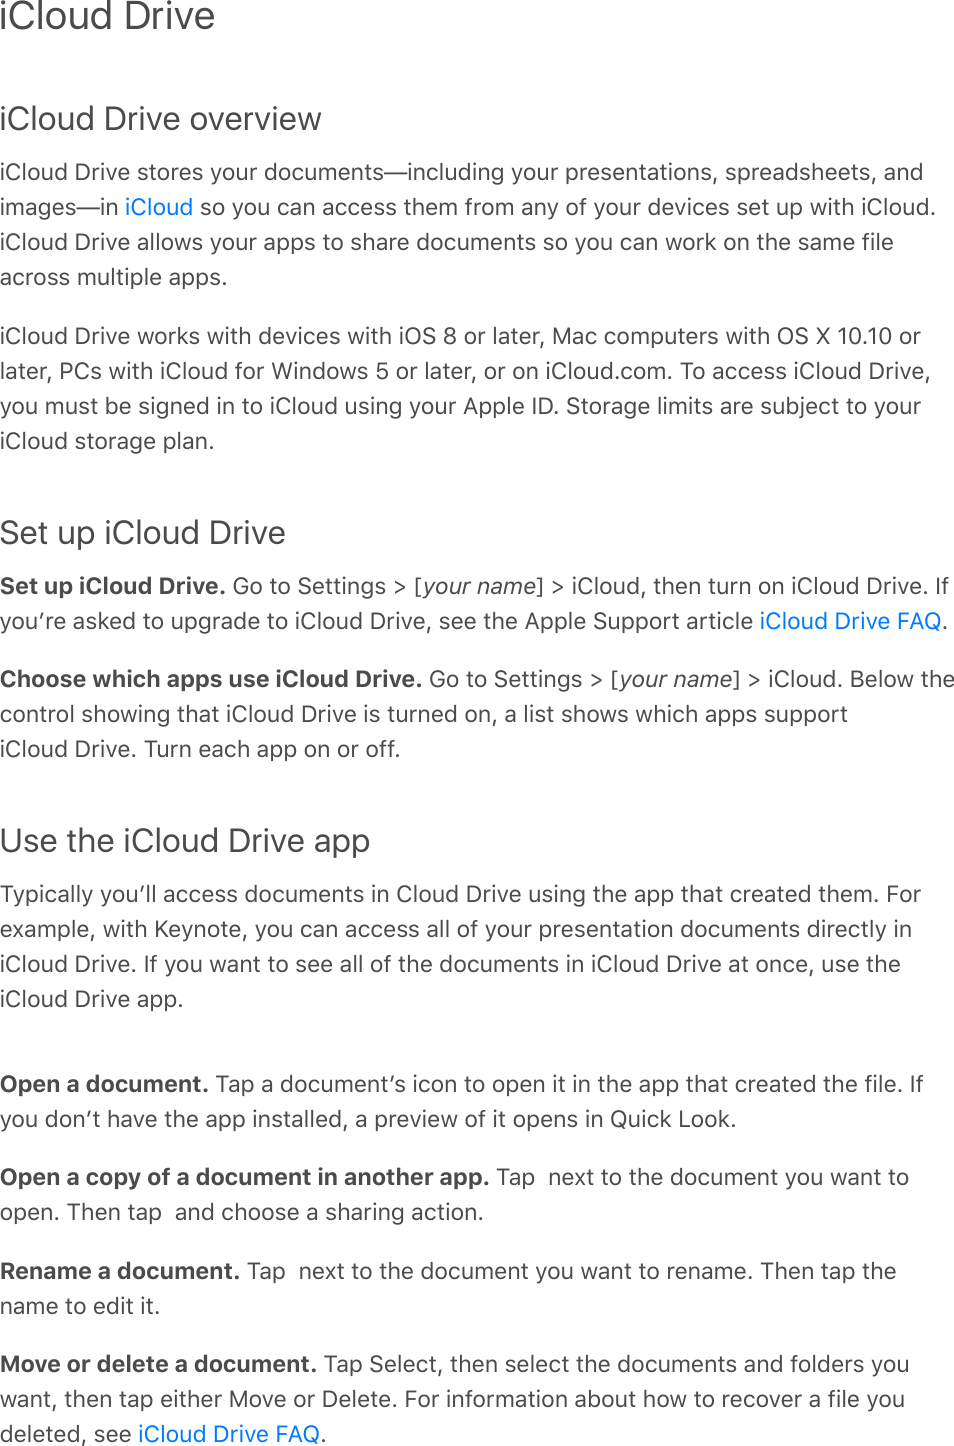 iCloud DriveiCloud Drive overview.432&gt;7%P$.D(%&amp;&quot;2$(&amp;%=2&gt;$%72)&gt;/(0&quot;&amp;c.0)3&gt;7.0;%=2&gt;$%-$(&amp;(0&quot;#&quot;.20&amp;L%&amp;-$(#7&amp;*((&quot;&amp;L%#07./#;(&amp;c.0% %&amp;2%=2&gt;%)#0%#))(&amp;&amp;%&quot;*(/%9$2/%#0=%29%=2&gt;$%7(D.)(&amp;%&amp;(&quot;%&gt;-%1.&quot;*%.432&gt;7E.432&gt;7%P$.D(%#3321&amp;%=2&gt;$%#--&amp;%&quot;2%&amp;*#$(%72)&gt;/(0&quot;&amp;%&amp;2%=2&gt;%)#0%12$&apos;%20%&quot;*(%&amp;#/(%9.3(#)$2&amp;&amp;%/&gt;3&quot;.-3(%#--&amp;E.432&gt;7%P$.D(%12$&apos;&amp;%1.&quot;*%7(D.)(&amp;%1.&quot;*%.G!%j%2$%3#&quot;($L%8#)%)2/-&gt;&quot;($&amp;%1.&quot;*%G!%h%HIEHI%2$3#&quot;($L%@4&amp;%1.&quot;*%.432&gt;7%92$%&lt;.0721&amp;%g%2$%3#&quot;($L%2$%20%.432&gt;7E)2/E%M2%#))(&amp;&amp;%.432&gt;7%P$.D(L=2&gt;%/&gt;&amp;&quot;%5(%&amp;.;0(7%.0%&quot;2%.432&gt;7%&gt;&amp;.0;%=2&gt;$%?--3(%SPE%!&quot;2$#;(%3./.&quot;&amp;%#$(%&amp;&gt;5U()&quot;%&quot;2%=2&gt;$.432&gt;7%&amp;&quot;2$#;(%-3#0ESet up iCloud DriveSet up iCloud Drive. 62%&quot;2%!(&quot;&quot;.0;&amp;%[%lyour namem%[%.432&gt;7L%&quot;*(0%&quot;&gt;$0%20%.432&gt;7%P$.D(E%S9=2&gt;F$(%#&amp;&apos;(7%&quot;2%&gt;-;$#7(%&quot;2%.432&gt;7%P$.D(L%&amp;((%&quot;*(%?--3(%!&gt;--2$&quot;%#$&quot;.)3(% EChoose which apps use iCloud Drive. 62%&quot;2%!(&quot;&quot;.0;&amp;%[%lyour namem%[%.432&gt;7E%J(321%&quot;*()20&quot;$23%&amp;*21.0;%&quot;*#&quot;%.432&gt;7%P$.D(%.&amp;%&quot;&gt;$0(7%20L%#%3.&amp;&quot;%&amp;*21&amp;%1*.)*%#--&amp;%&amp;&gt;--2$&quot;.432&gt;7%P$.D(E%M&gt;$0%(#)*%#--%20%2$%299EUse the iCloud Drive appM=-.)#33=%=2&gt;F33%#))(&amp;&amp;%72)&gt;/(0&quot;&amp;%.0%432&gt;7%P$.D(%&gt;&amp;.0;%&quot;*(%#--%&quot;*#&quot;%)$(#&quot;(7%&quot;*(/E%B2$(,#/-3(L%1.&quot;*%a(=02&quot;(L%=2&gt;%)#0%#))(&amp;&amp;%#33%29%=2&gt;$%-$(&amp;(0&quot;#&quot;.20%72)&gt;/(0&quot;&amp;%7.$()&quot;3=%.0.432&gt;7%P$.D(E%S9%=2&gt;%1#0&quot;%&quot;2%&amp;((%#33%29%&quot;*(%72)&gt;/(0&quot;&amp;%.0%.432&gt;7%P$.D(%#&quot;%20)(L%&gt;&amp;(%&quot;*(.432&gt;7%P$.D(%#--EOpen a document. M#-%#%72)&gt;/(0&quot;F&amp;%.)20%&quot;2%2-(0%.&quot;%.0%&quot;*(%#--%&quot;*#&quot;%)$(#&quot;(7%&quot;*(%9.3(E%S9=2&gt;%720F&quot;%*#D(%&quot;*(%#--%.0&amp;&quot;#33(7L%#%-$(D.(1%29%.&quot;%2-(0&amp;%.0%q&gt;.)&apos;%V22&apos;EOpen a copy of a document in another app. M#-%%0(,&quot;%&quot;2%&quot;*(%72)&gt;/(0&quot;%=2&gt;%1#0&quot;%&quot;22-(0E%M*(0%&quot;#-%%#07%)*22&amp;(%#%&amp;*#$.0;%#)&quot;.20ERename a document. M#-%%0(,&quot;%&quot;2%&quot;*(%72)&gt;/(0&quot;%=2&gt;%1#0&quot;%&quot;2%$(0#/(E%M*(0%&quot;#-%&quot;*(0#/(%&quot;2%(7.&quot;%.&quot;EMove or delete a document. M#-%!(3()&quot;L%&quot;*(0%&amp;(3()&quot;%&quot;*(%72)&gt;/(0&quot;&amp;%#07%9237($&amp;%=2&gt;1#0&quot;L%&quot;*(0%&quot;#-%(.&quot;*($%82D(%2$%P(3(&quot;(E%B2$%.092$/#&quot;.20%#52&gt;&quot;%*21%&quot;2%$()2D($%#%9.3(%=2&gt;7(3(&quot;(7L%&amp;((% E.432&gt;7.432&gt;7%P$.D(%B?q.432&gt;7%P$.D(%B?q